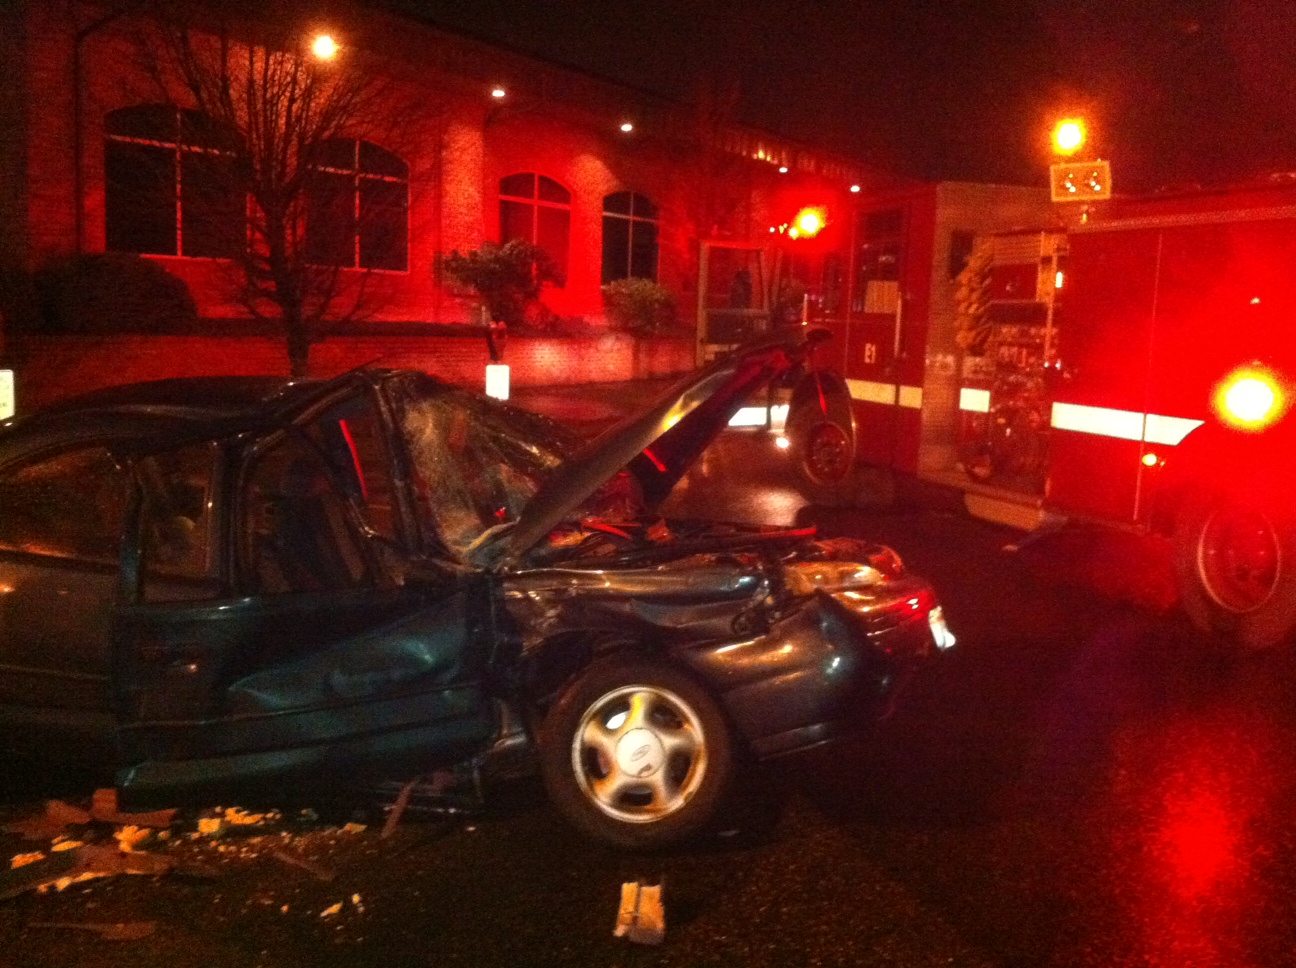 Police say alcohol may have been a factor in this accident on Washington Street in downtown Vancouver last January.